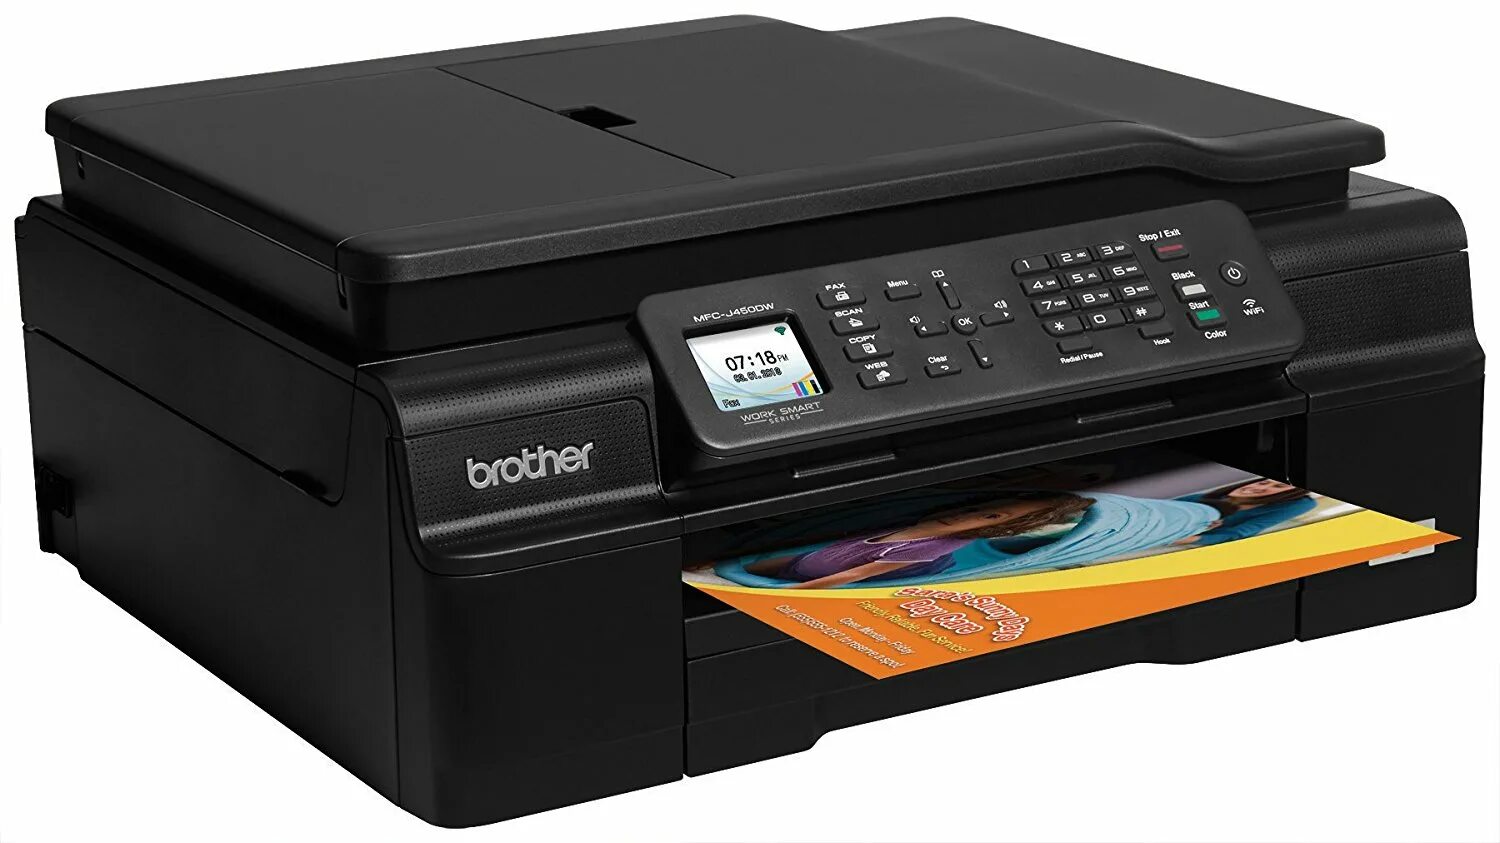 МФУ brother MFC-j825dw. Brother MFC-7820nr. МФУ brother MFC-t4500dw. Лазерное МФУ brother MFC-l6900dw. Brother print